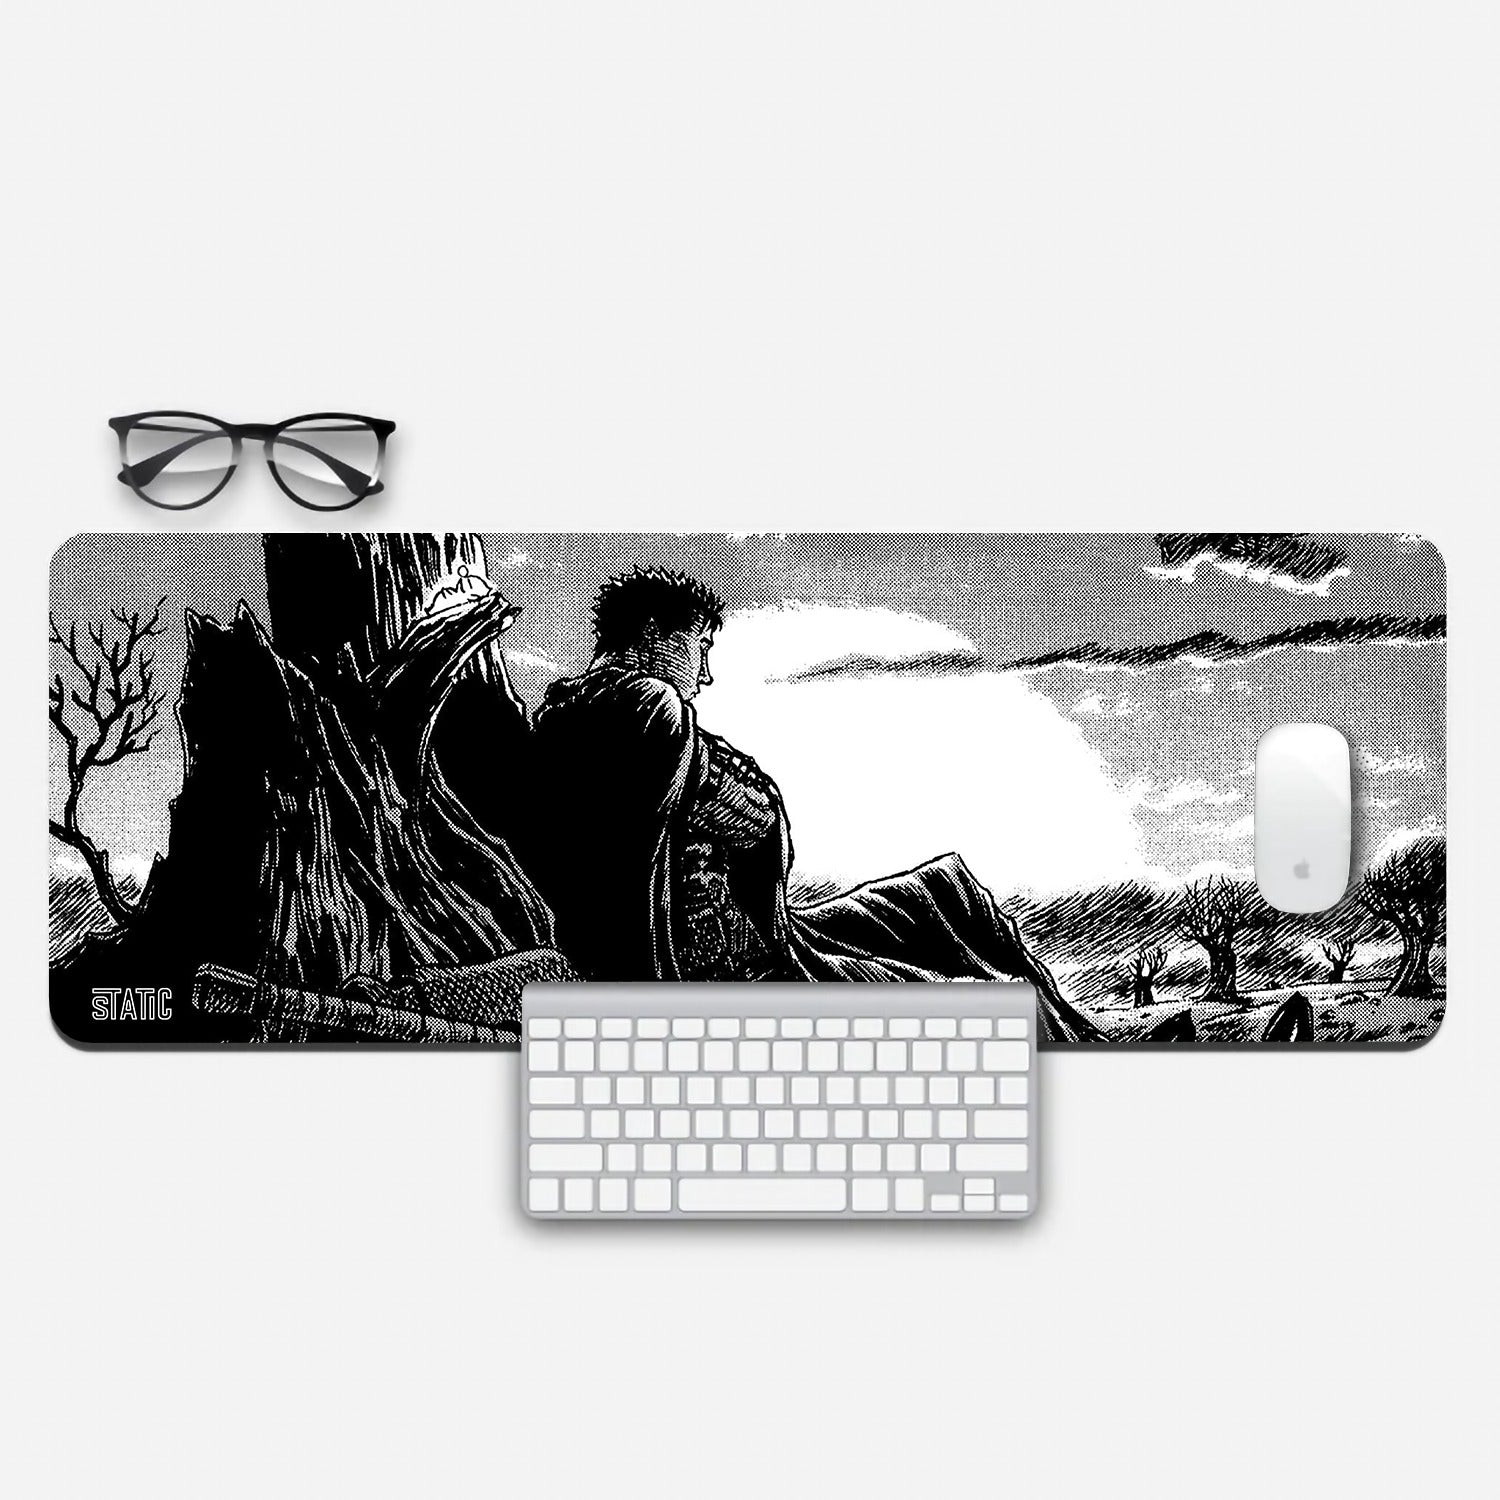 Experience the relentless world of Berserk with our extended gaming mouse pad. This captivating black and white design features Guts, the Black Swordsman, seated against a broken tree stump, framed by a haunting forest and a setting sun on the horizon. Immerse yourself in the dark fantasy and enhance your gaming precision and control. Order now and join Guts on his quest for vengeance and survival in the ruthless world of Berserk.